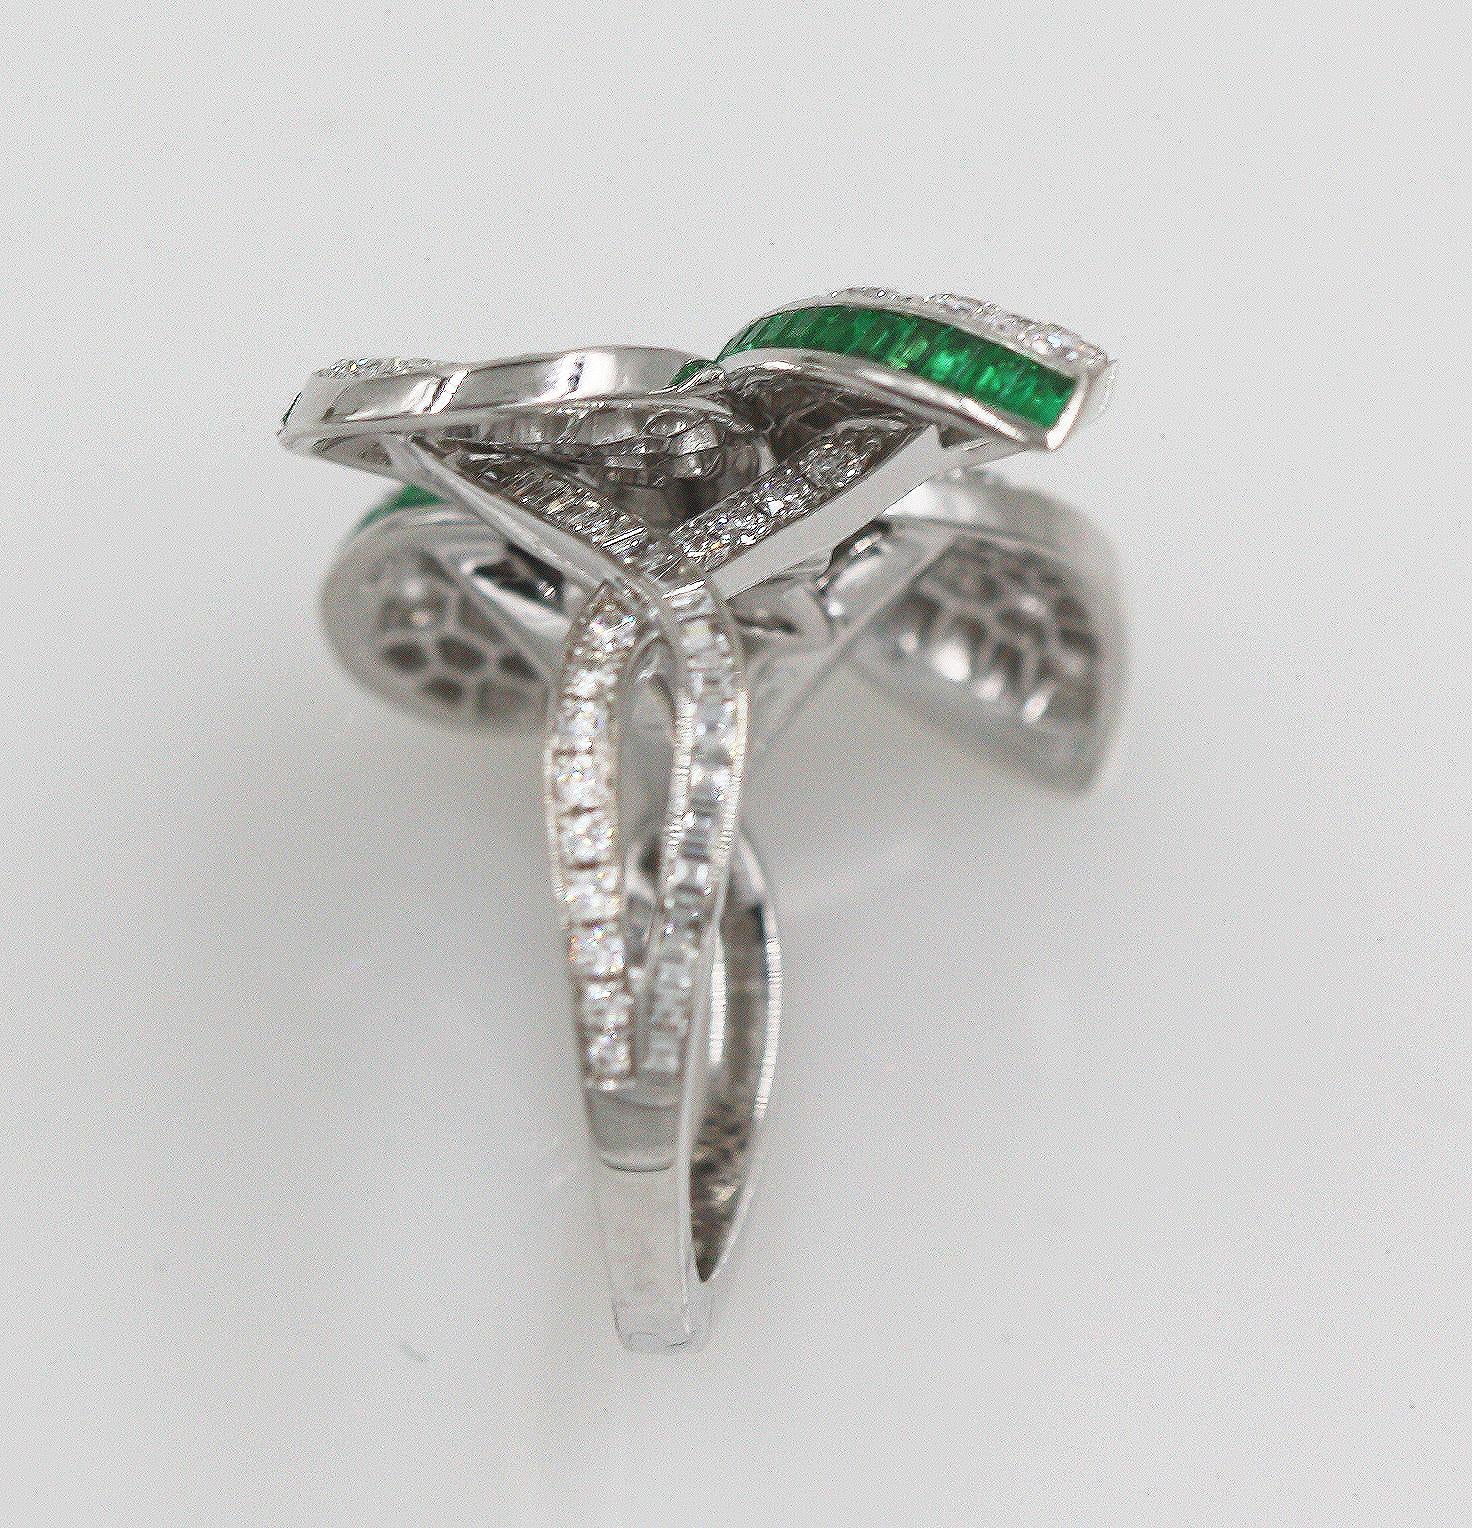 Ring Size: 50; US: 5.5 (This Ring can be resize by Boutique)
34 Baguette Diamonds weighing approx. 0.29 Carats. Clarity: VS+
139 Round Diamonds weighing approx. 1.75 Carats. Clarity: VS+
48 Baguette Emeralds weighing approx. 0.57 Carats. 
Total